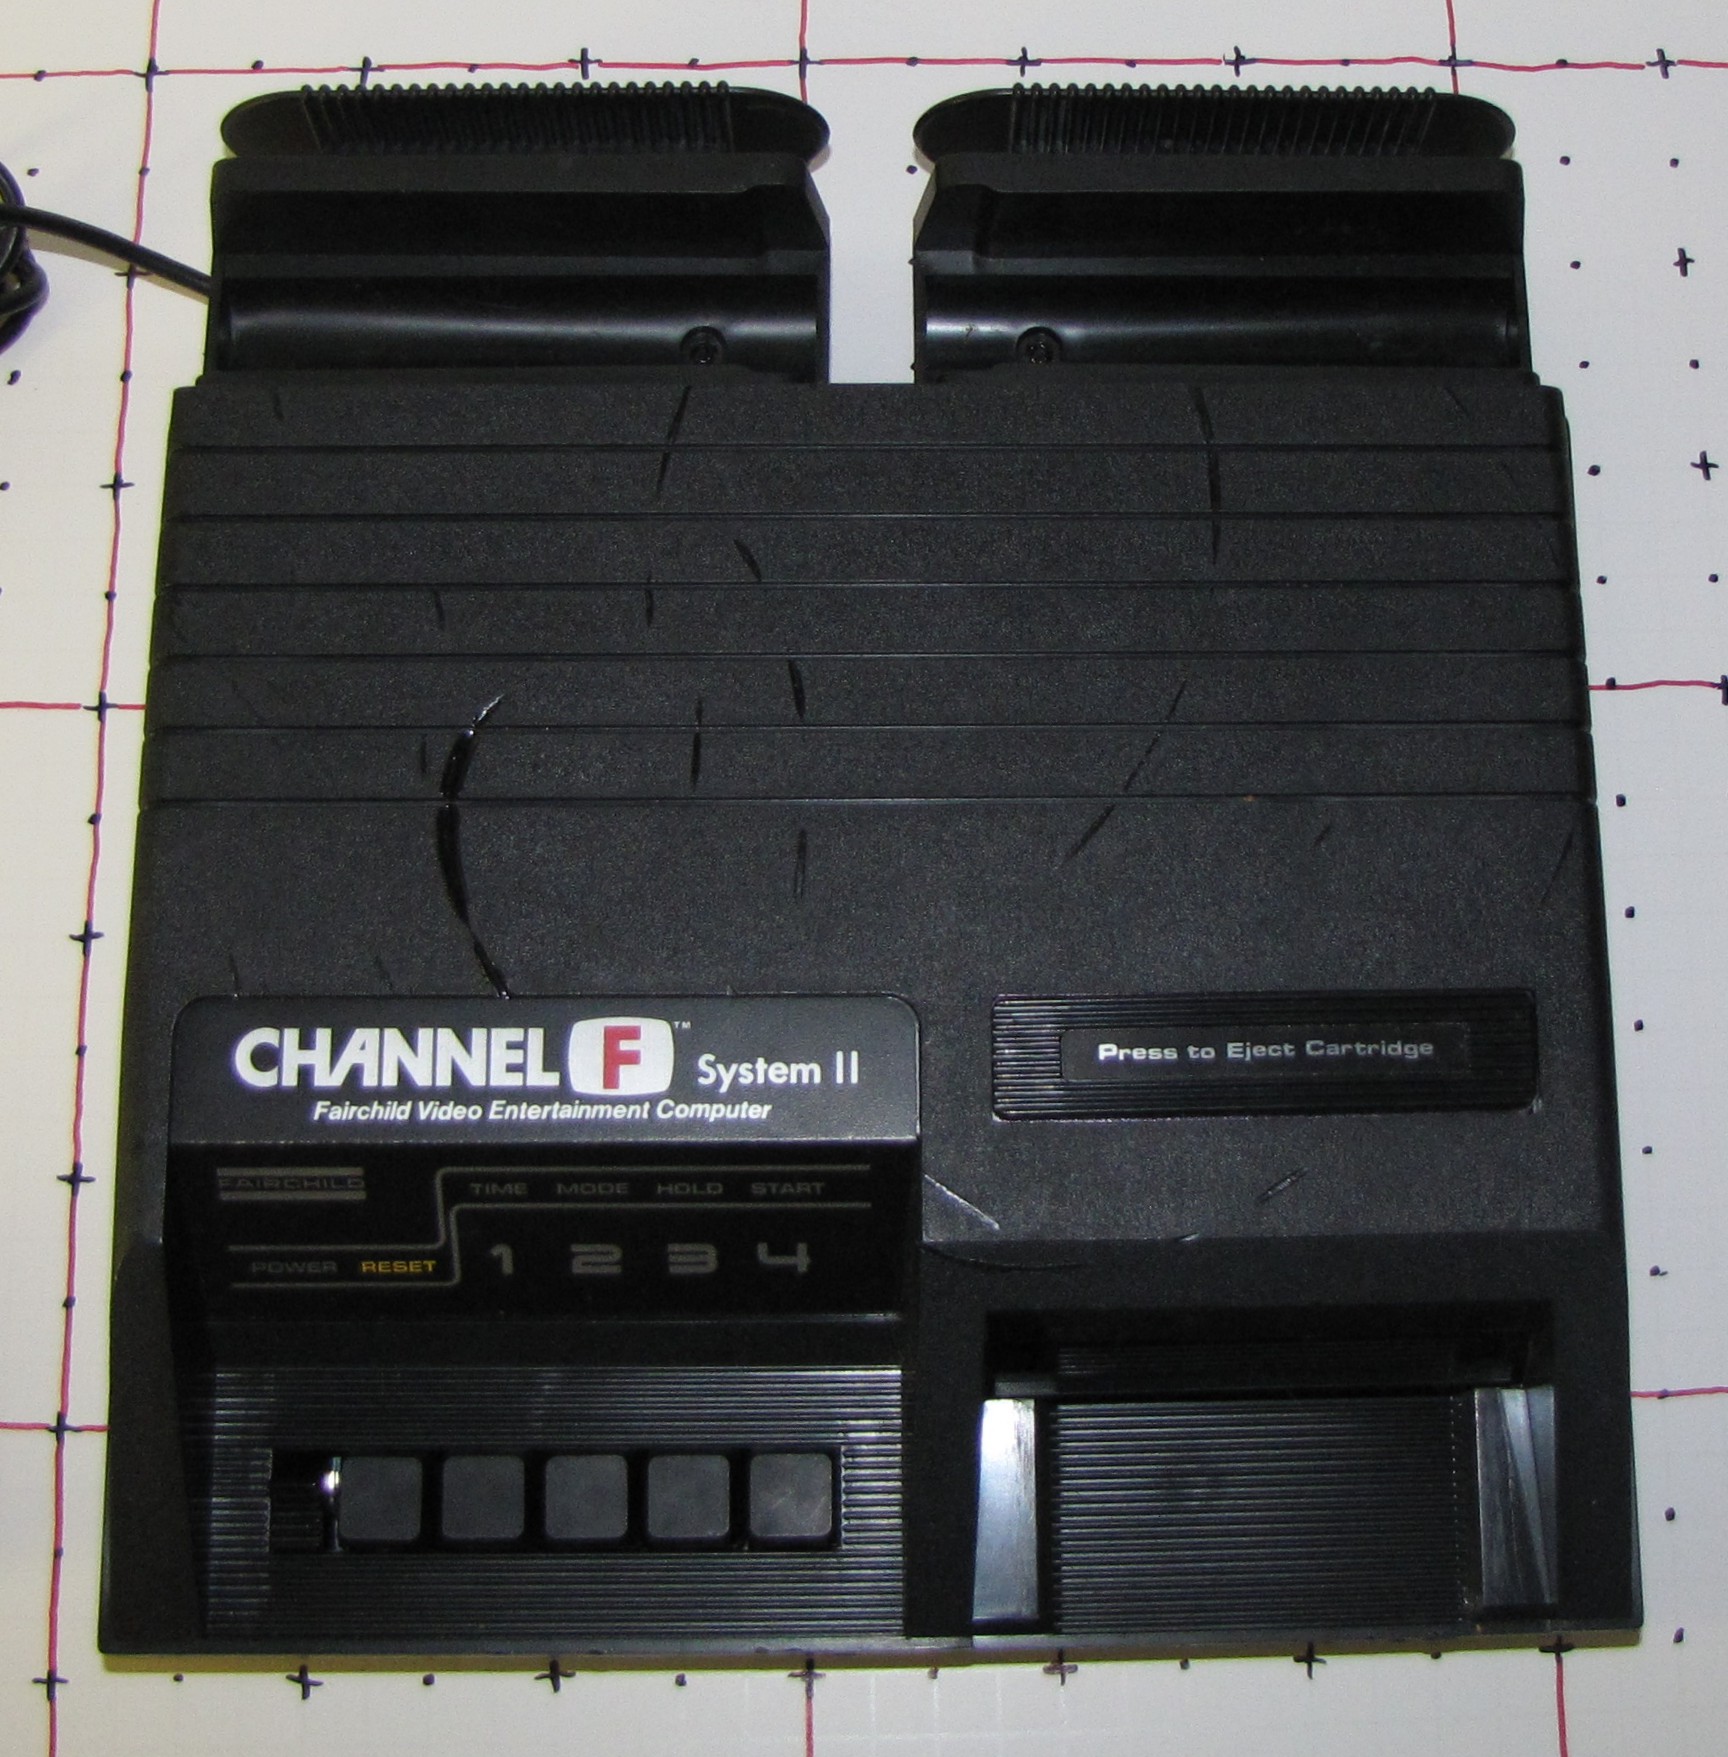 Know Your Console - Fairchild Channel F